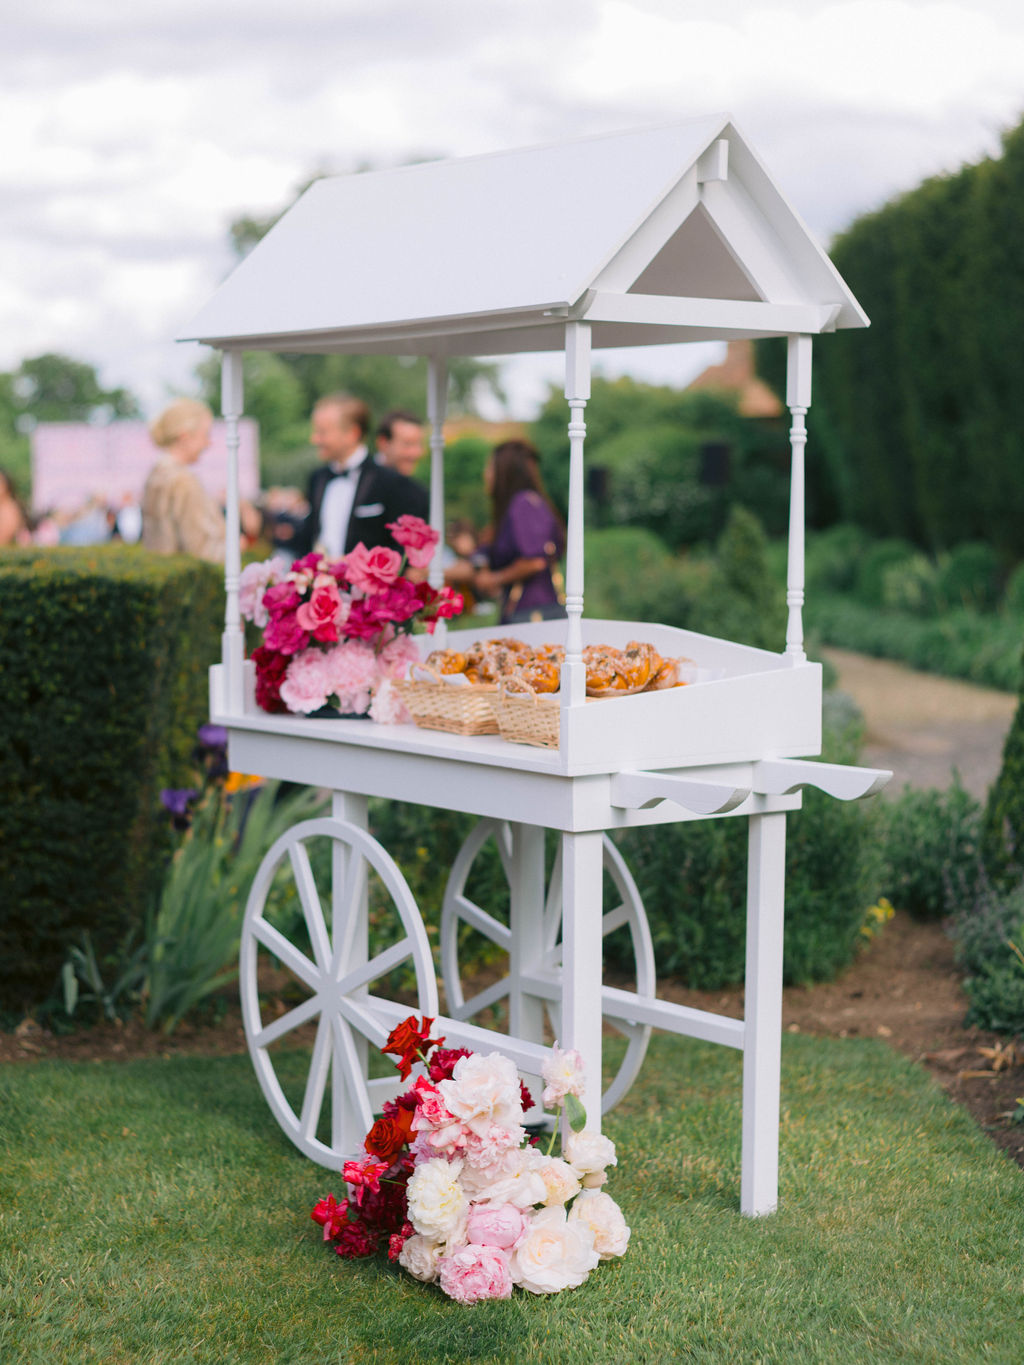 White cart with Swedish buns during drinks reception - Vogue wedding feature